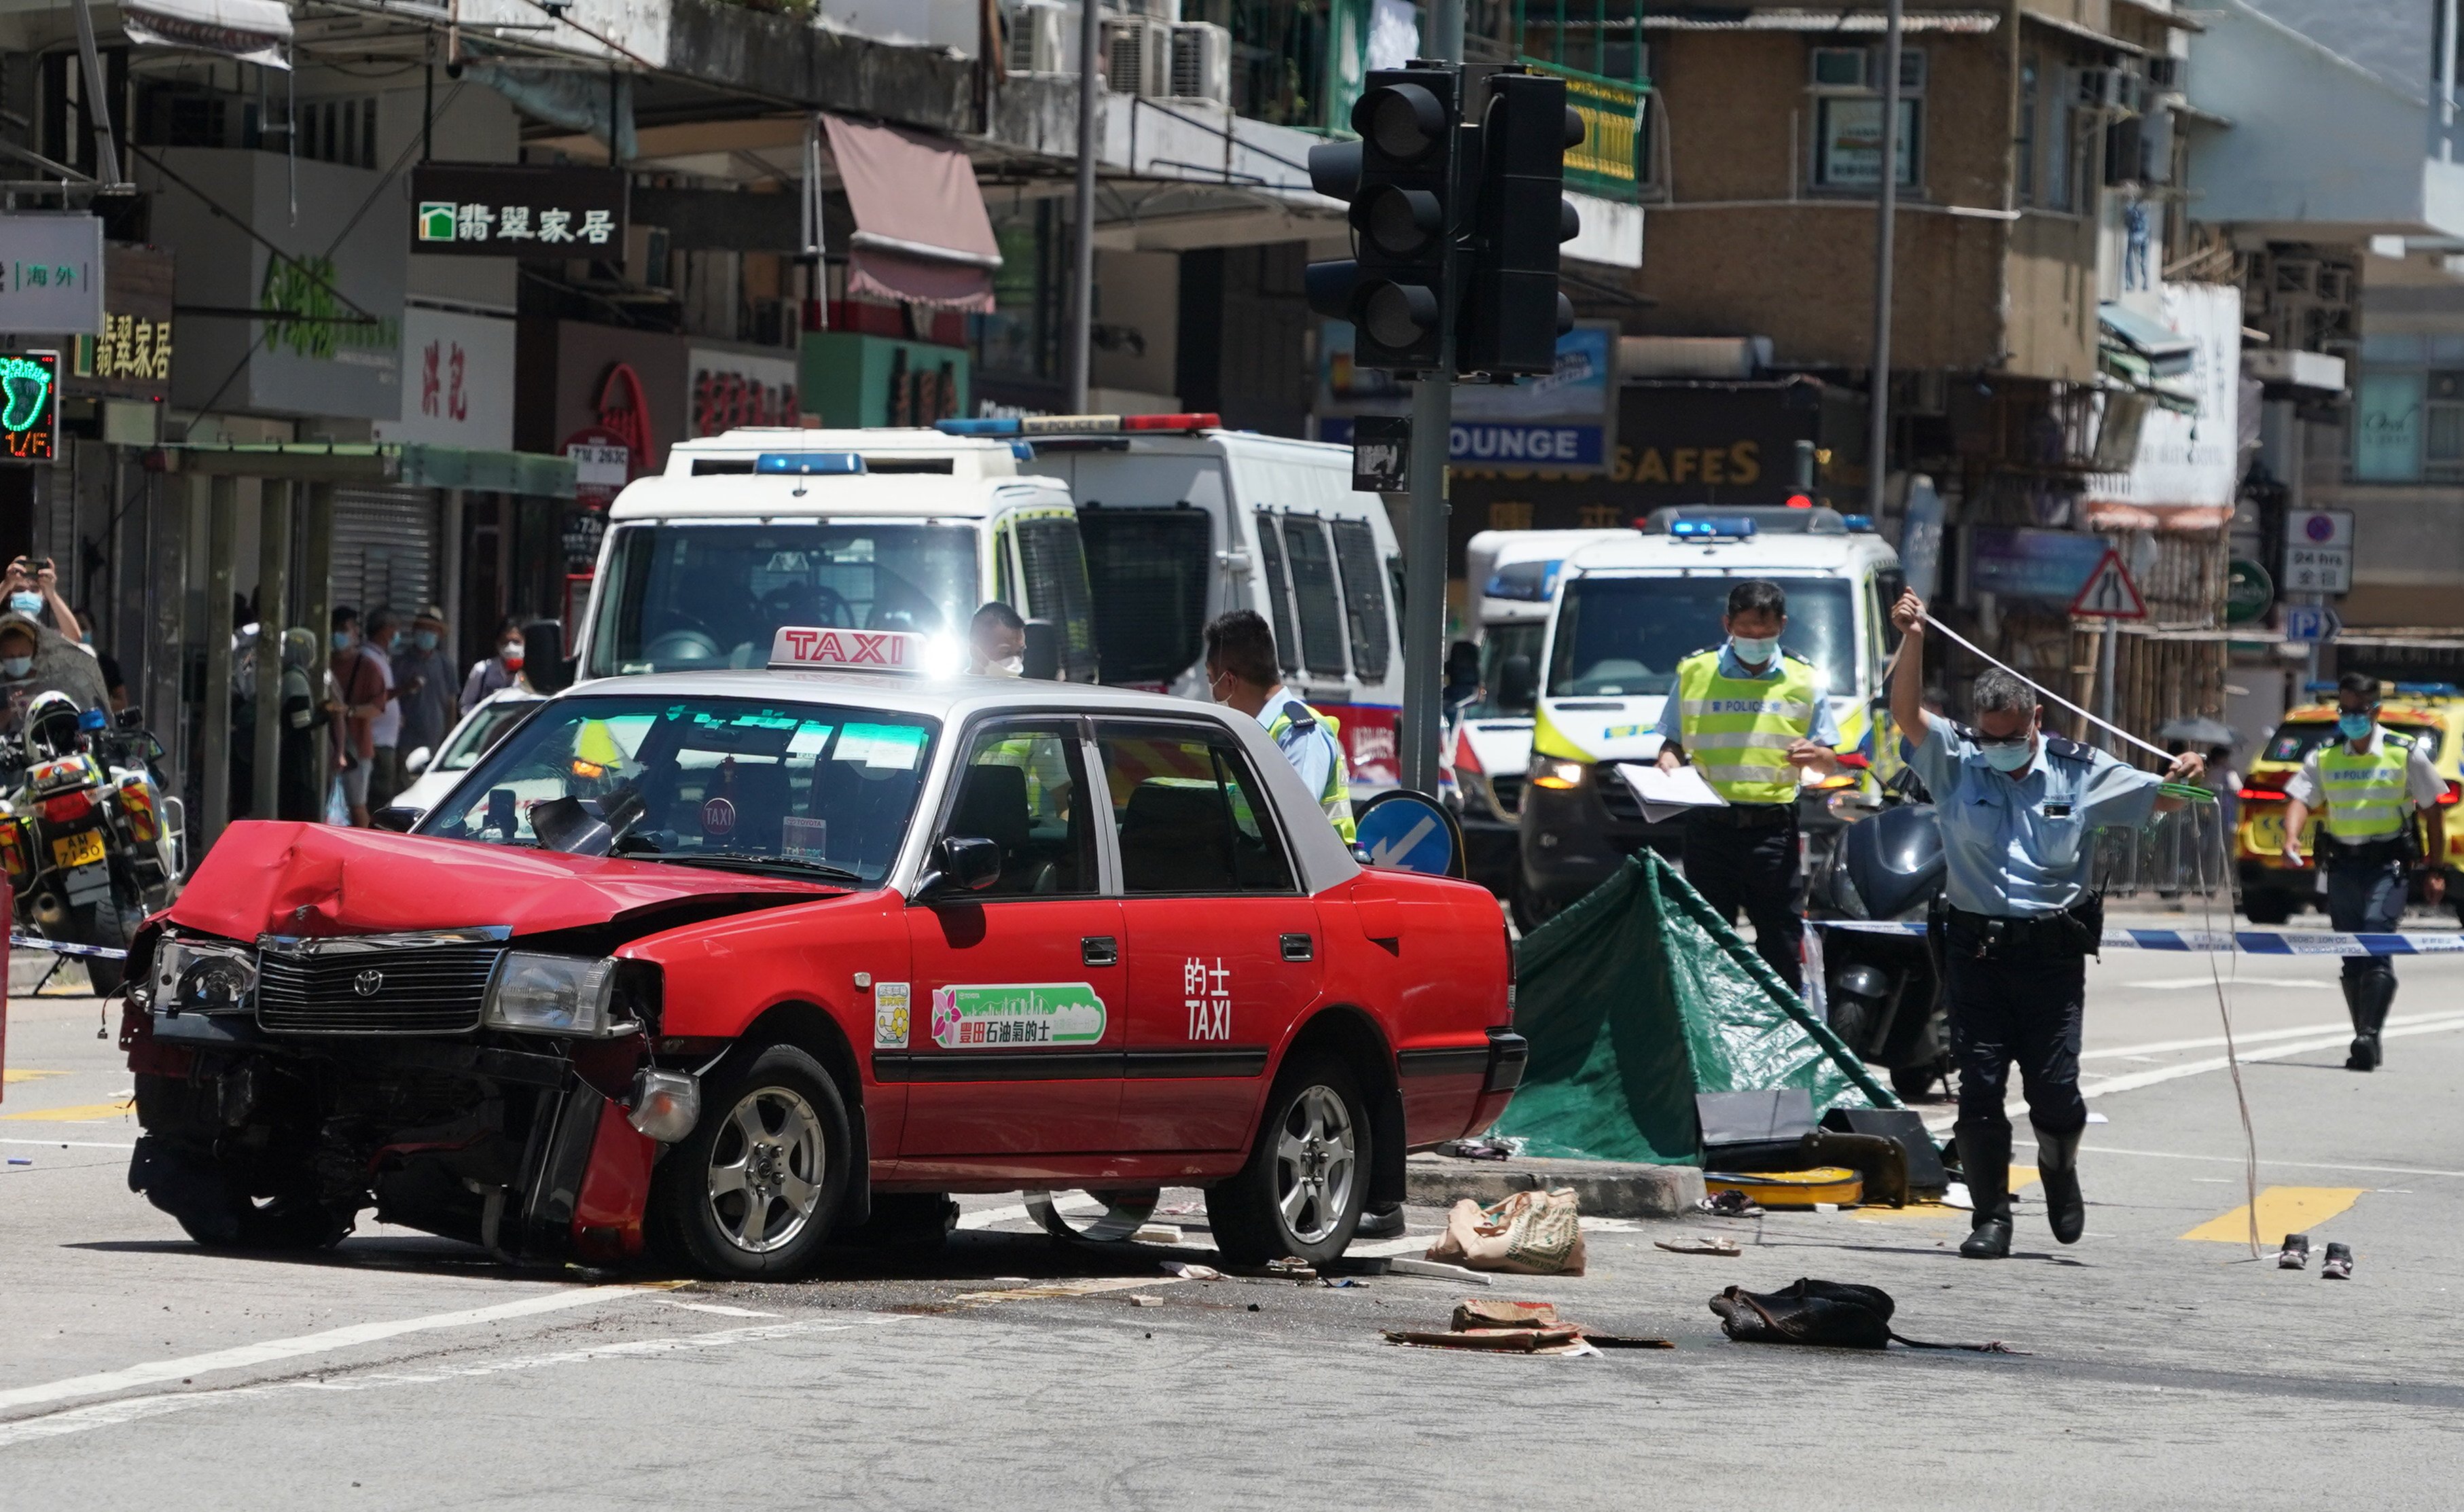 The aftermath of the crash on Kwong Fuk Road in Tai Po. One person died at the scene, and another a day later in hospital. Photo: Felix Wong